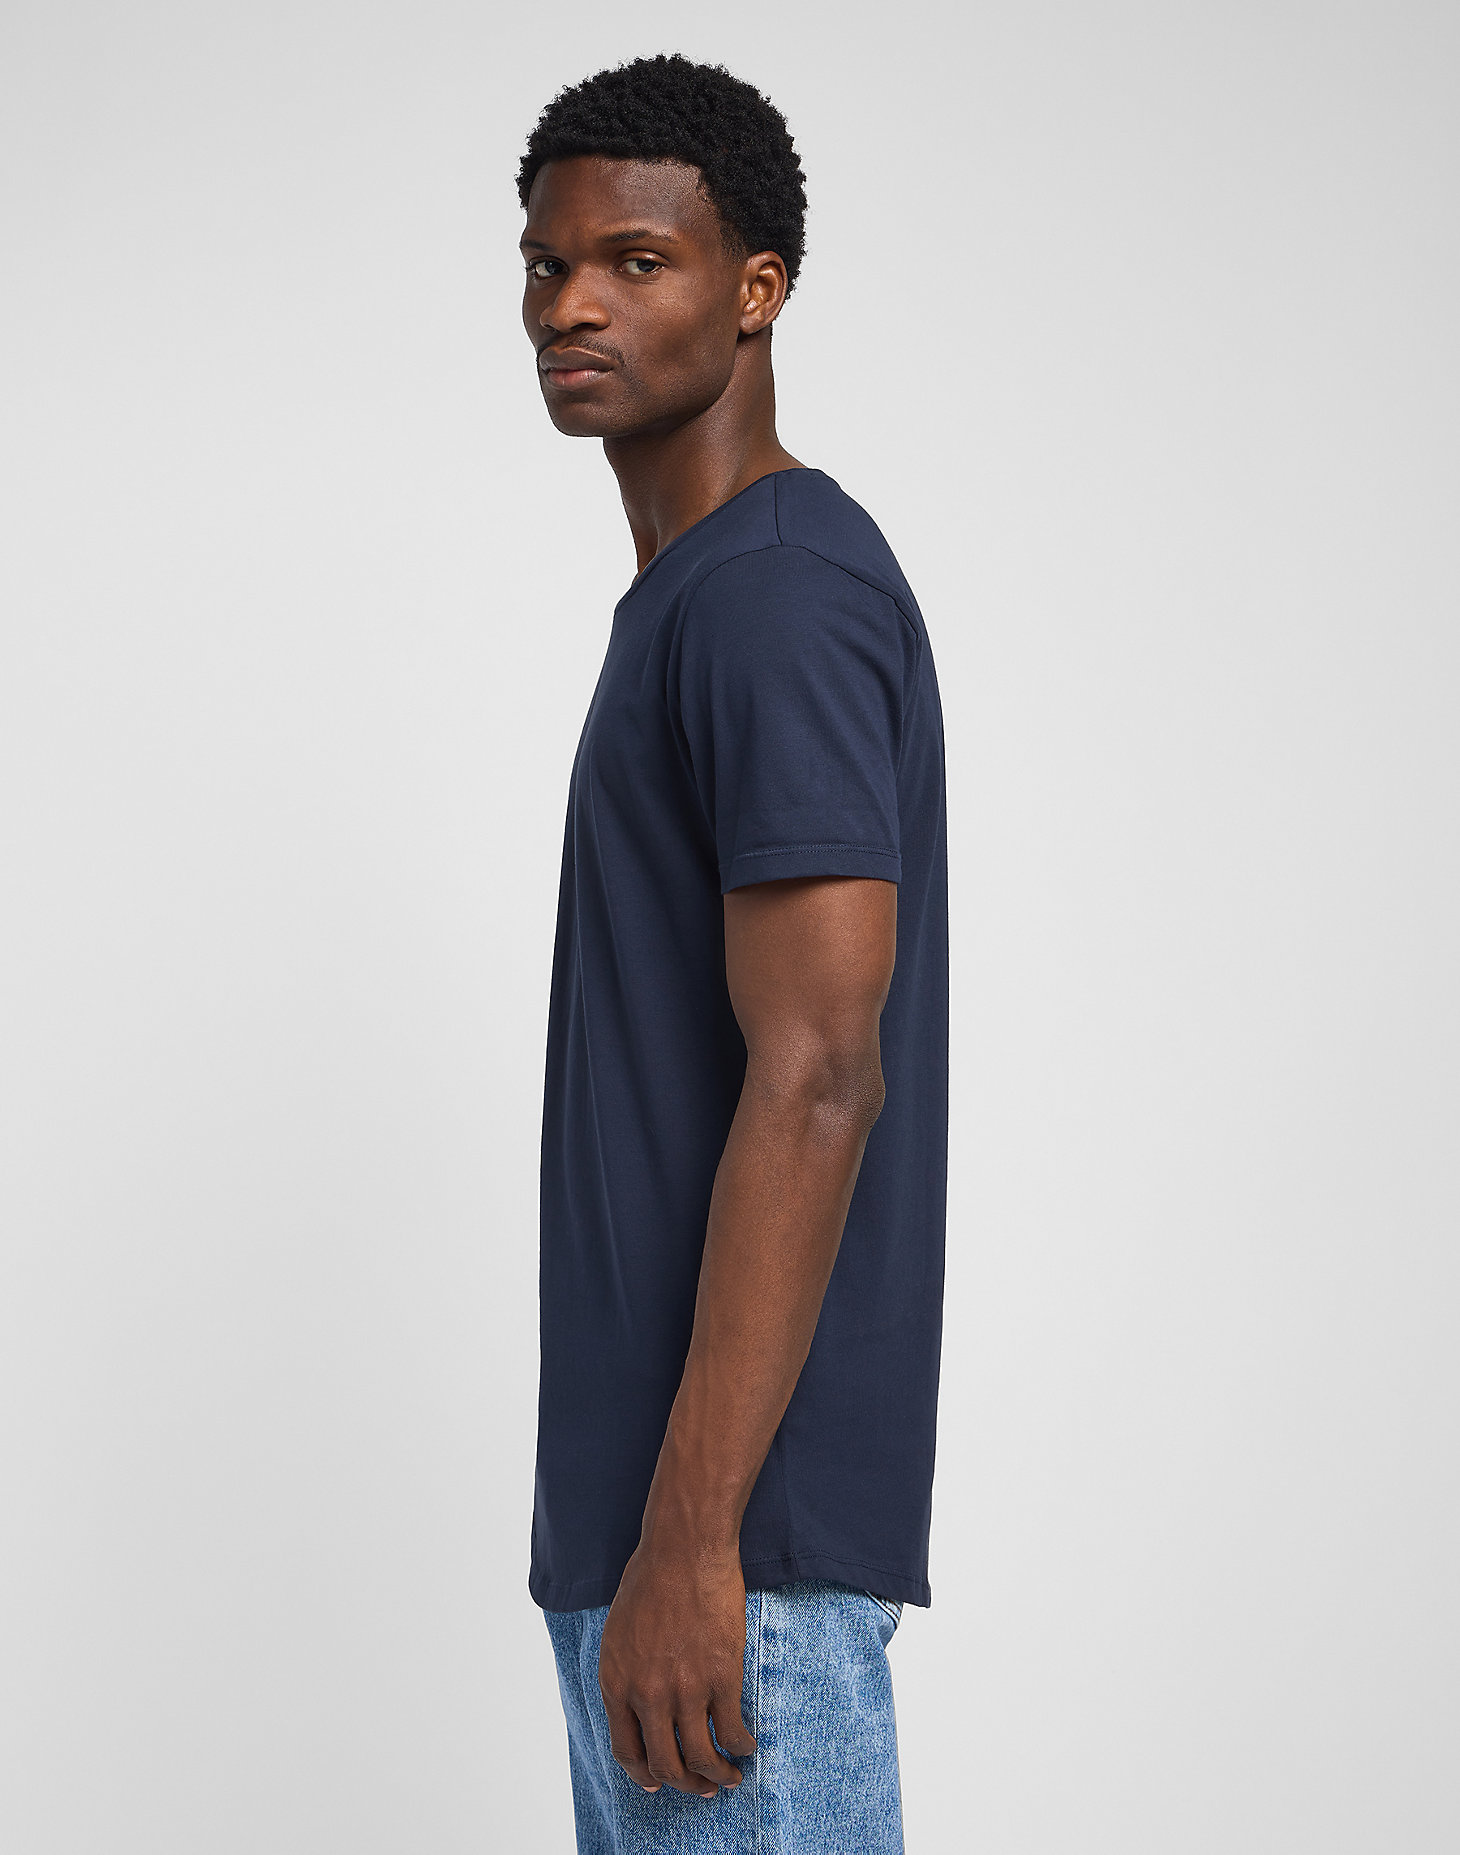 Shaped Tee in Sky Captain alternative view 3